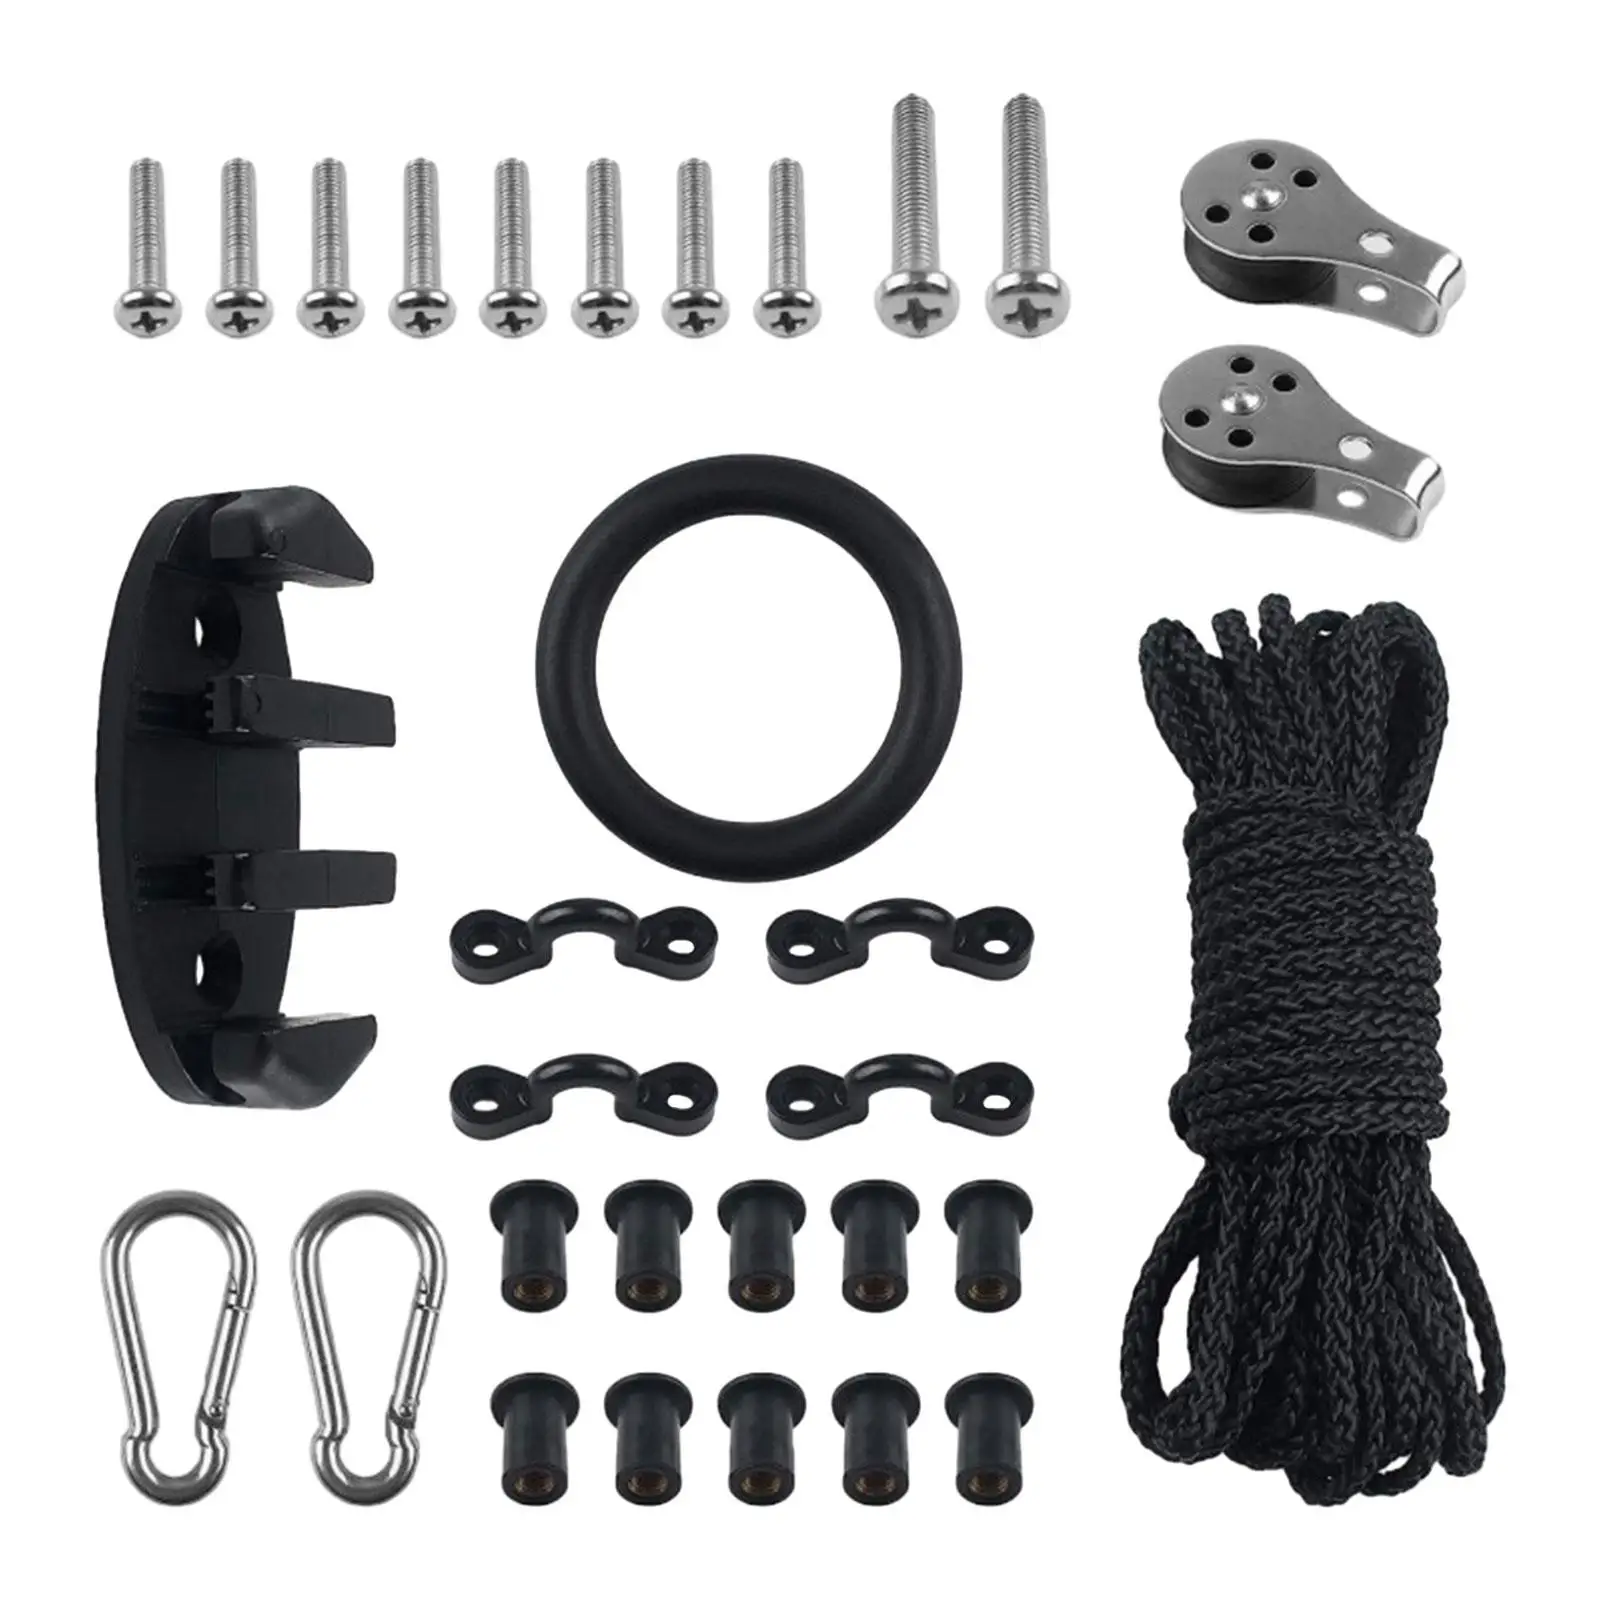 31x Kayak Canoe Anchor Trolley Kit Hardware Portable Zig Zag Cleat 9M Rope for Fishing Boat Water Sports Marine Rubber Dinghy